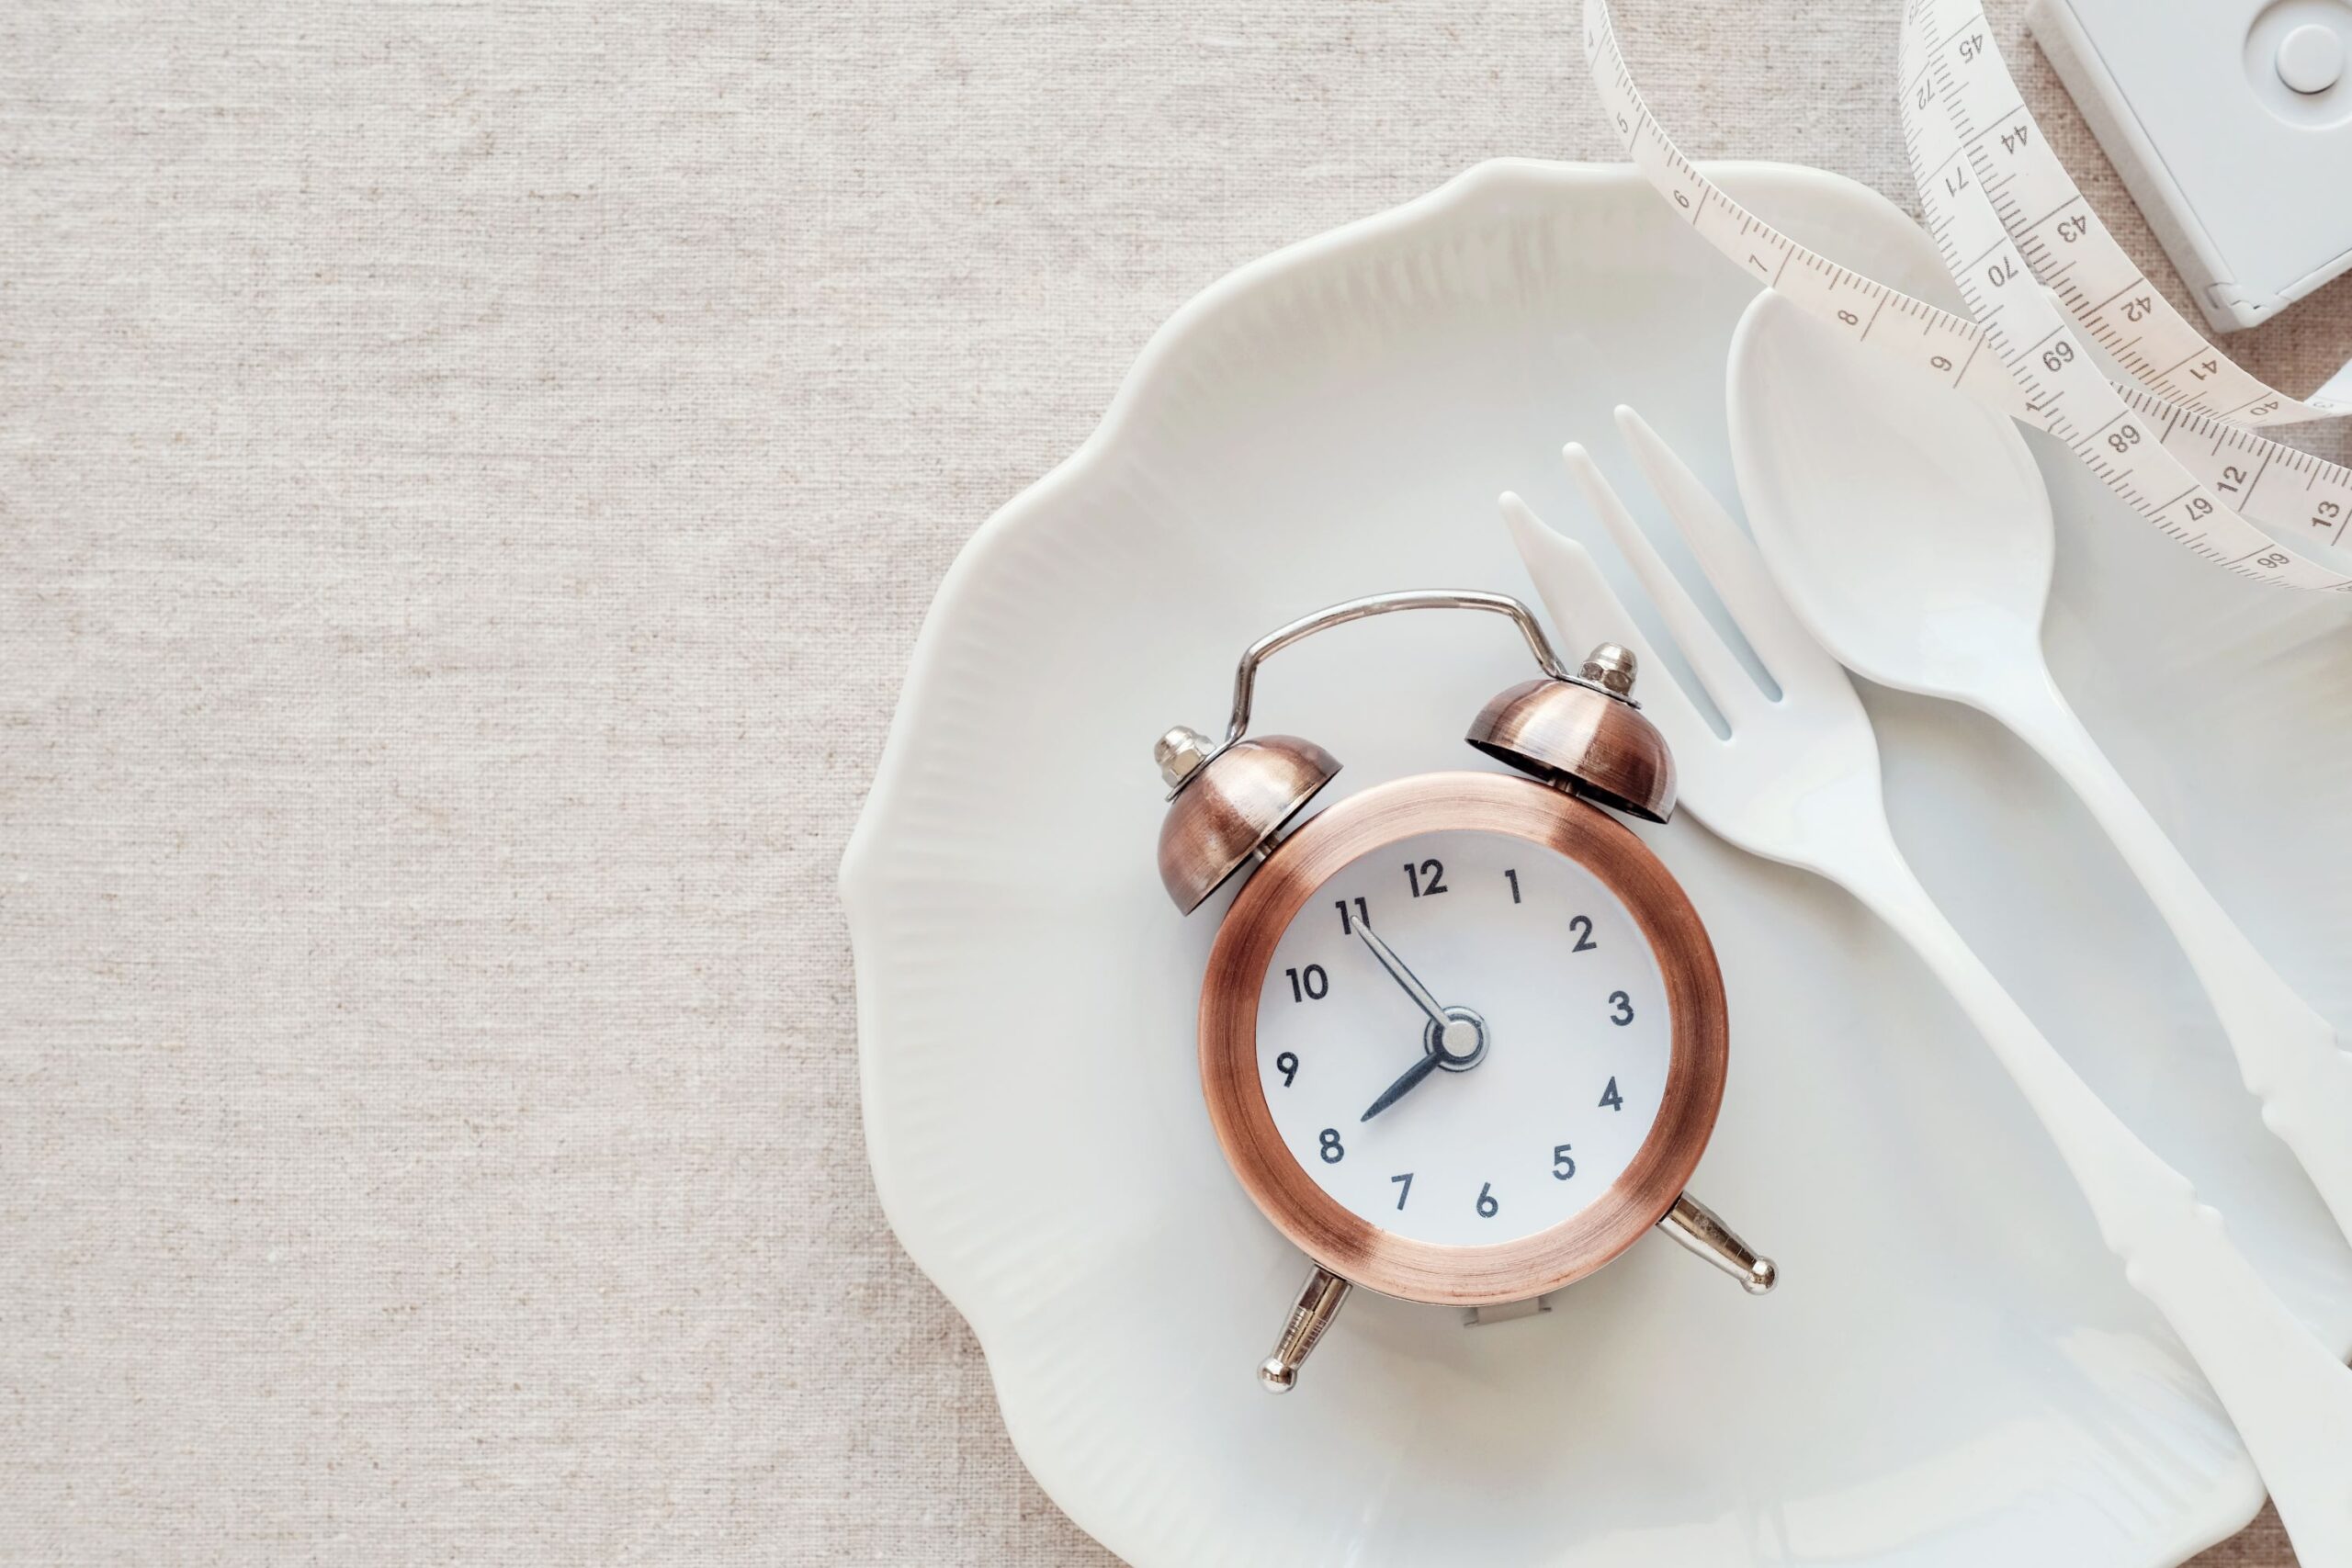 Intermittent Fasting Helps To Improve Energy, Mood, And Hunger